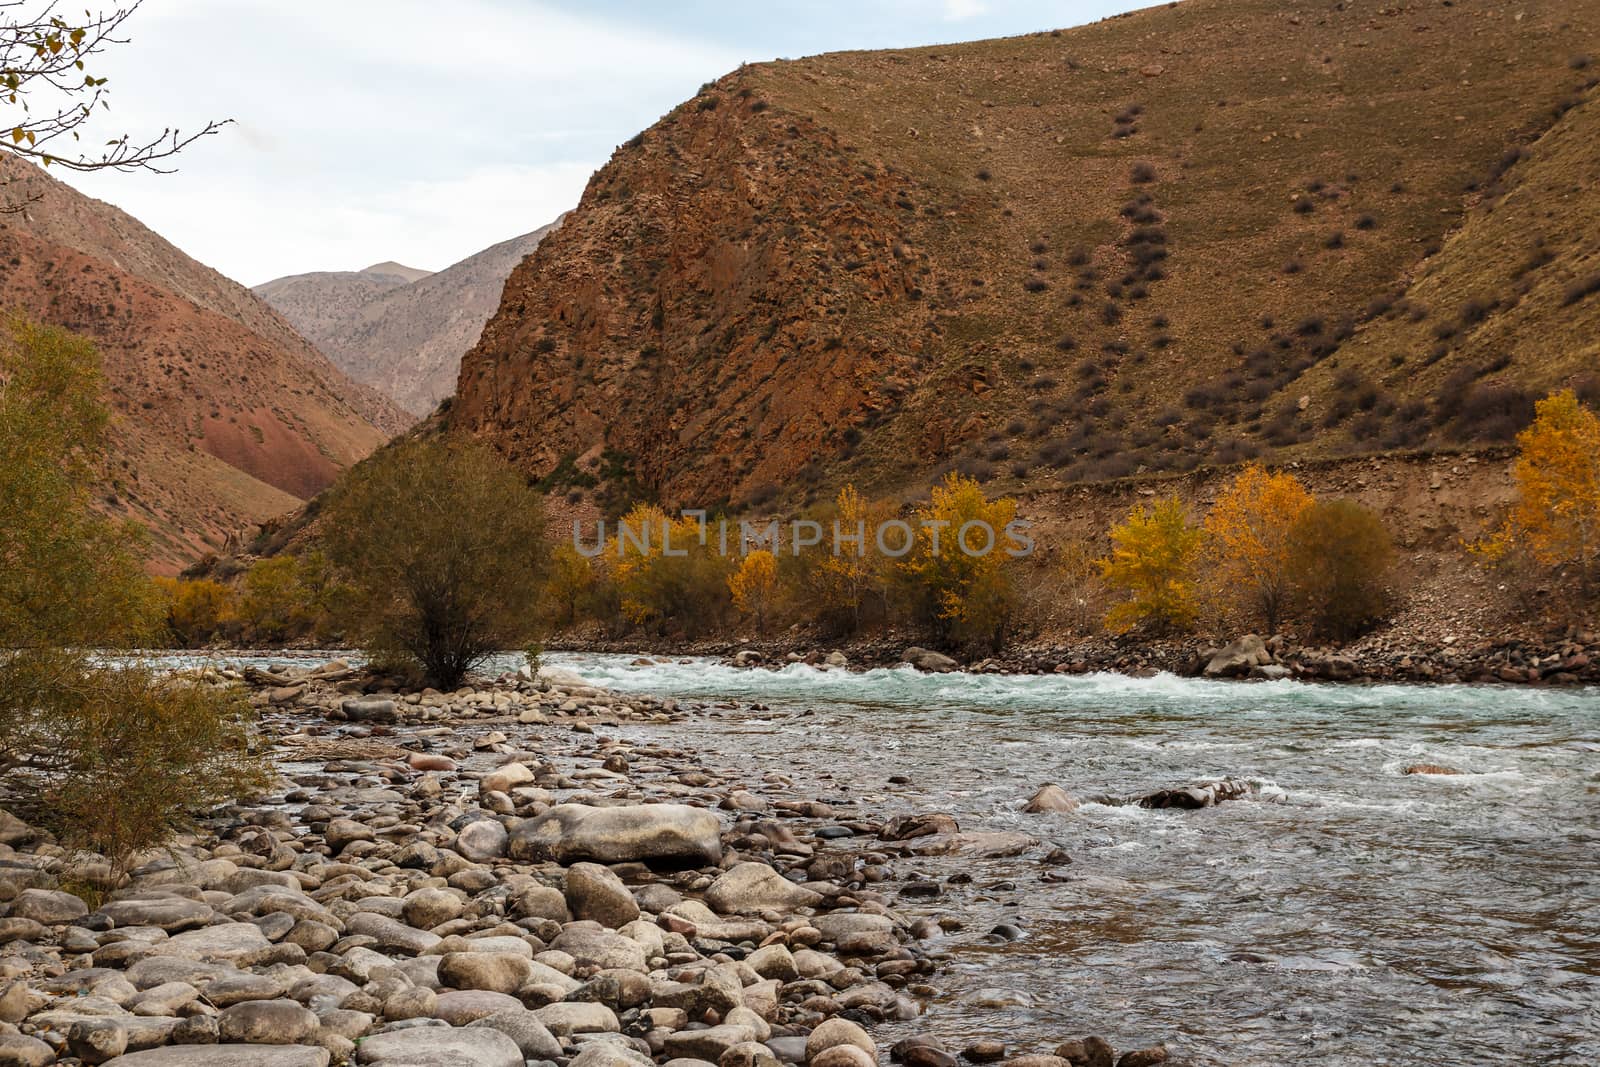 The rocky shore of a mountain river. Kokemeren river is a right tributary of Naryn River located in Jumgal District of Naryn Province of Kyrgyzstan.